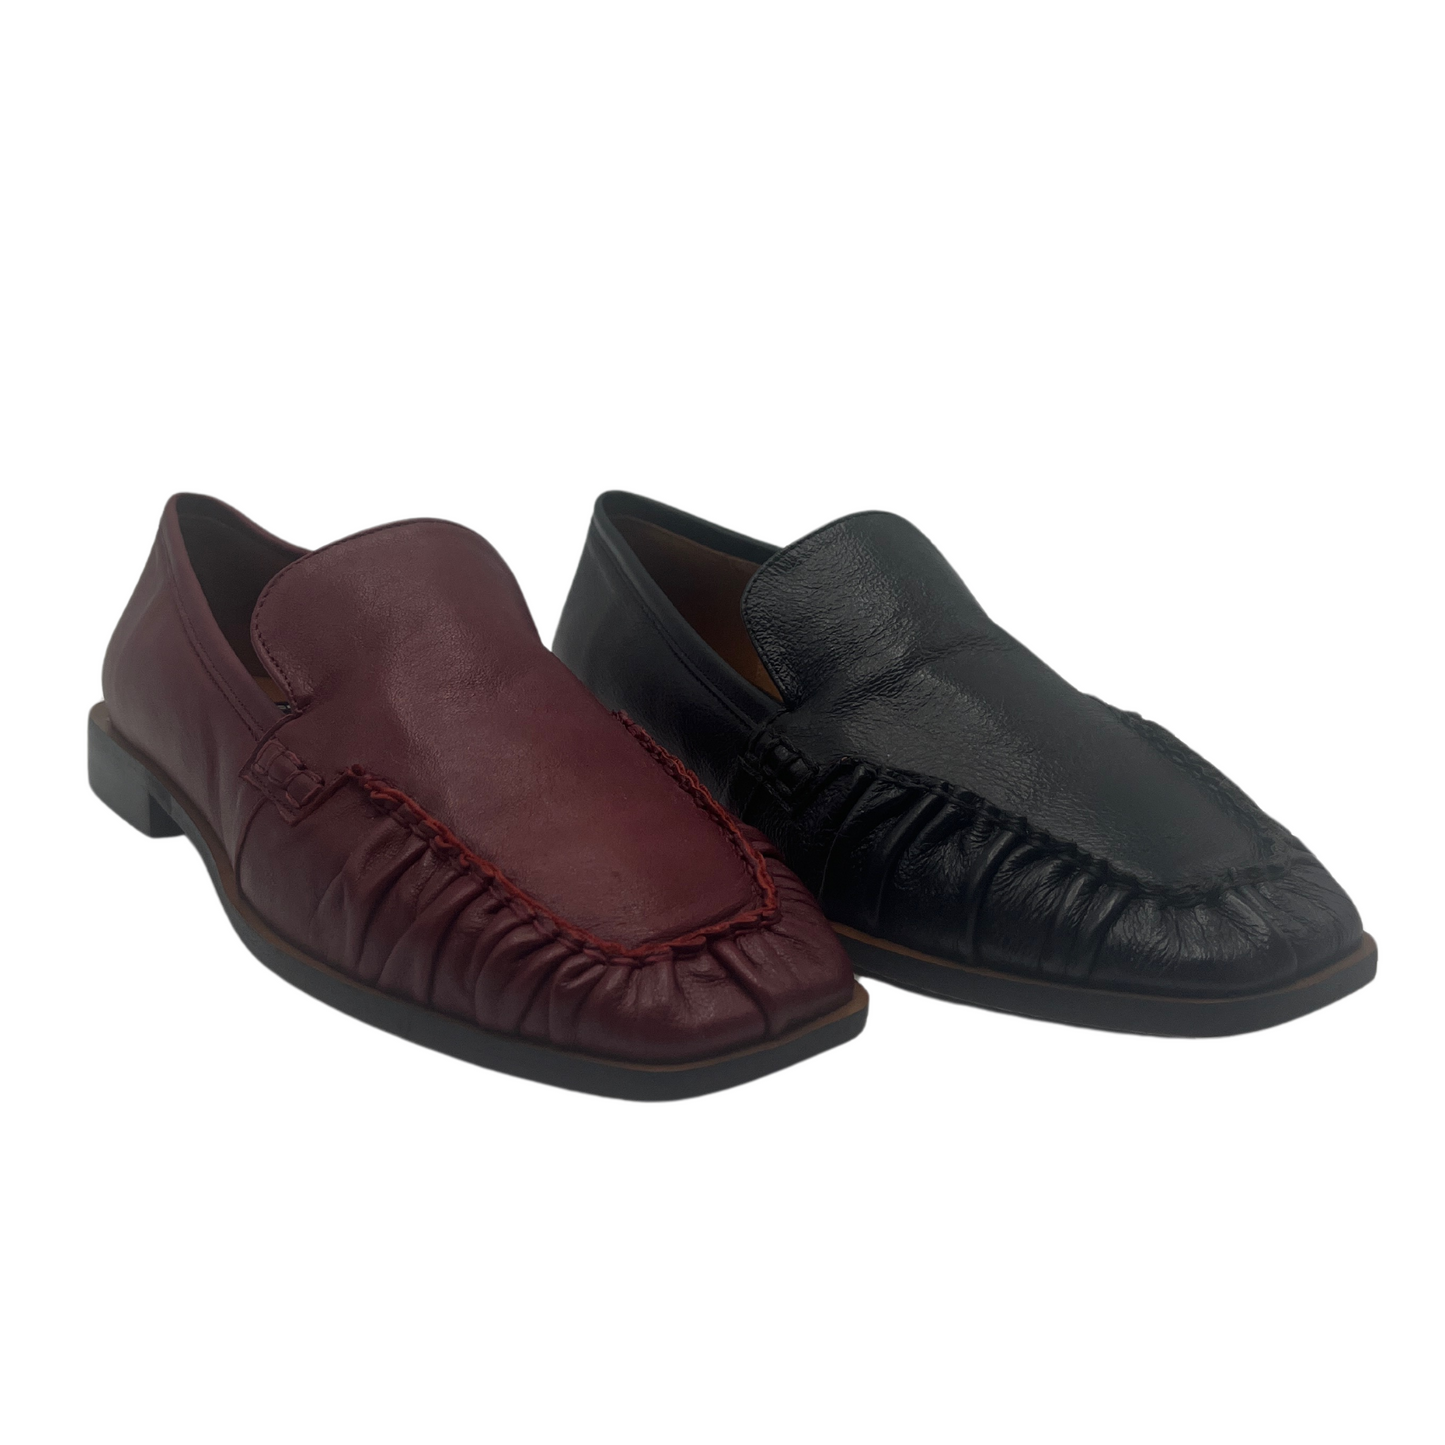 View of a pair of leather loafers one is red and one is black. Both have square toes and short block heels